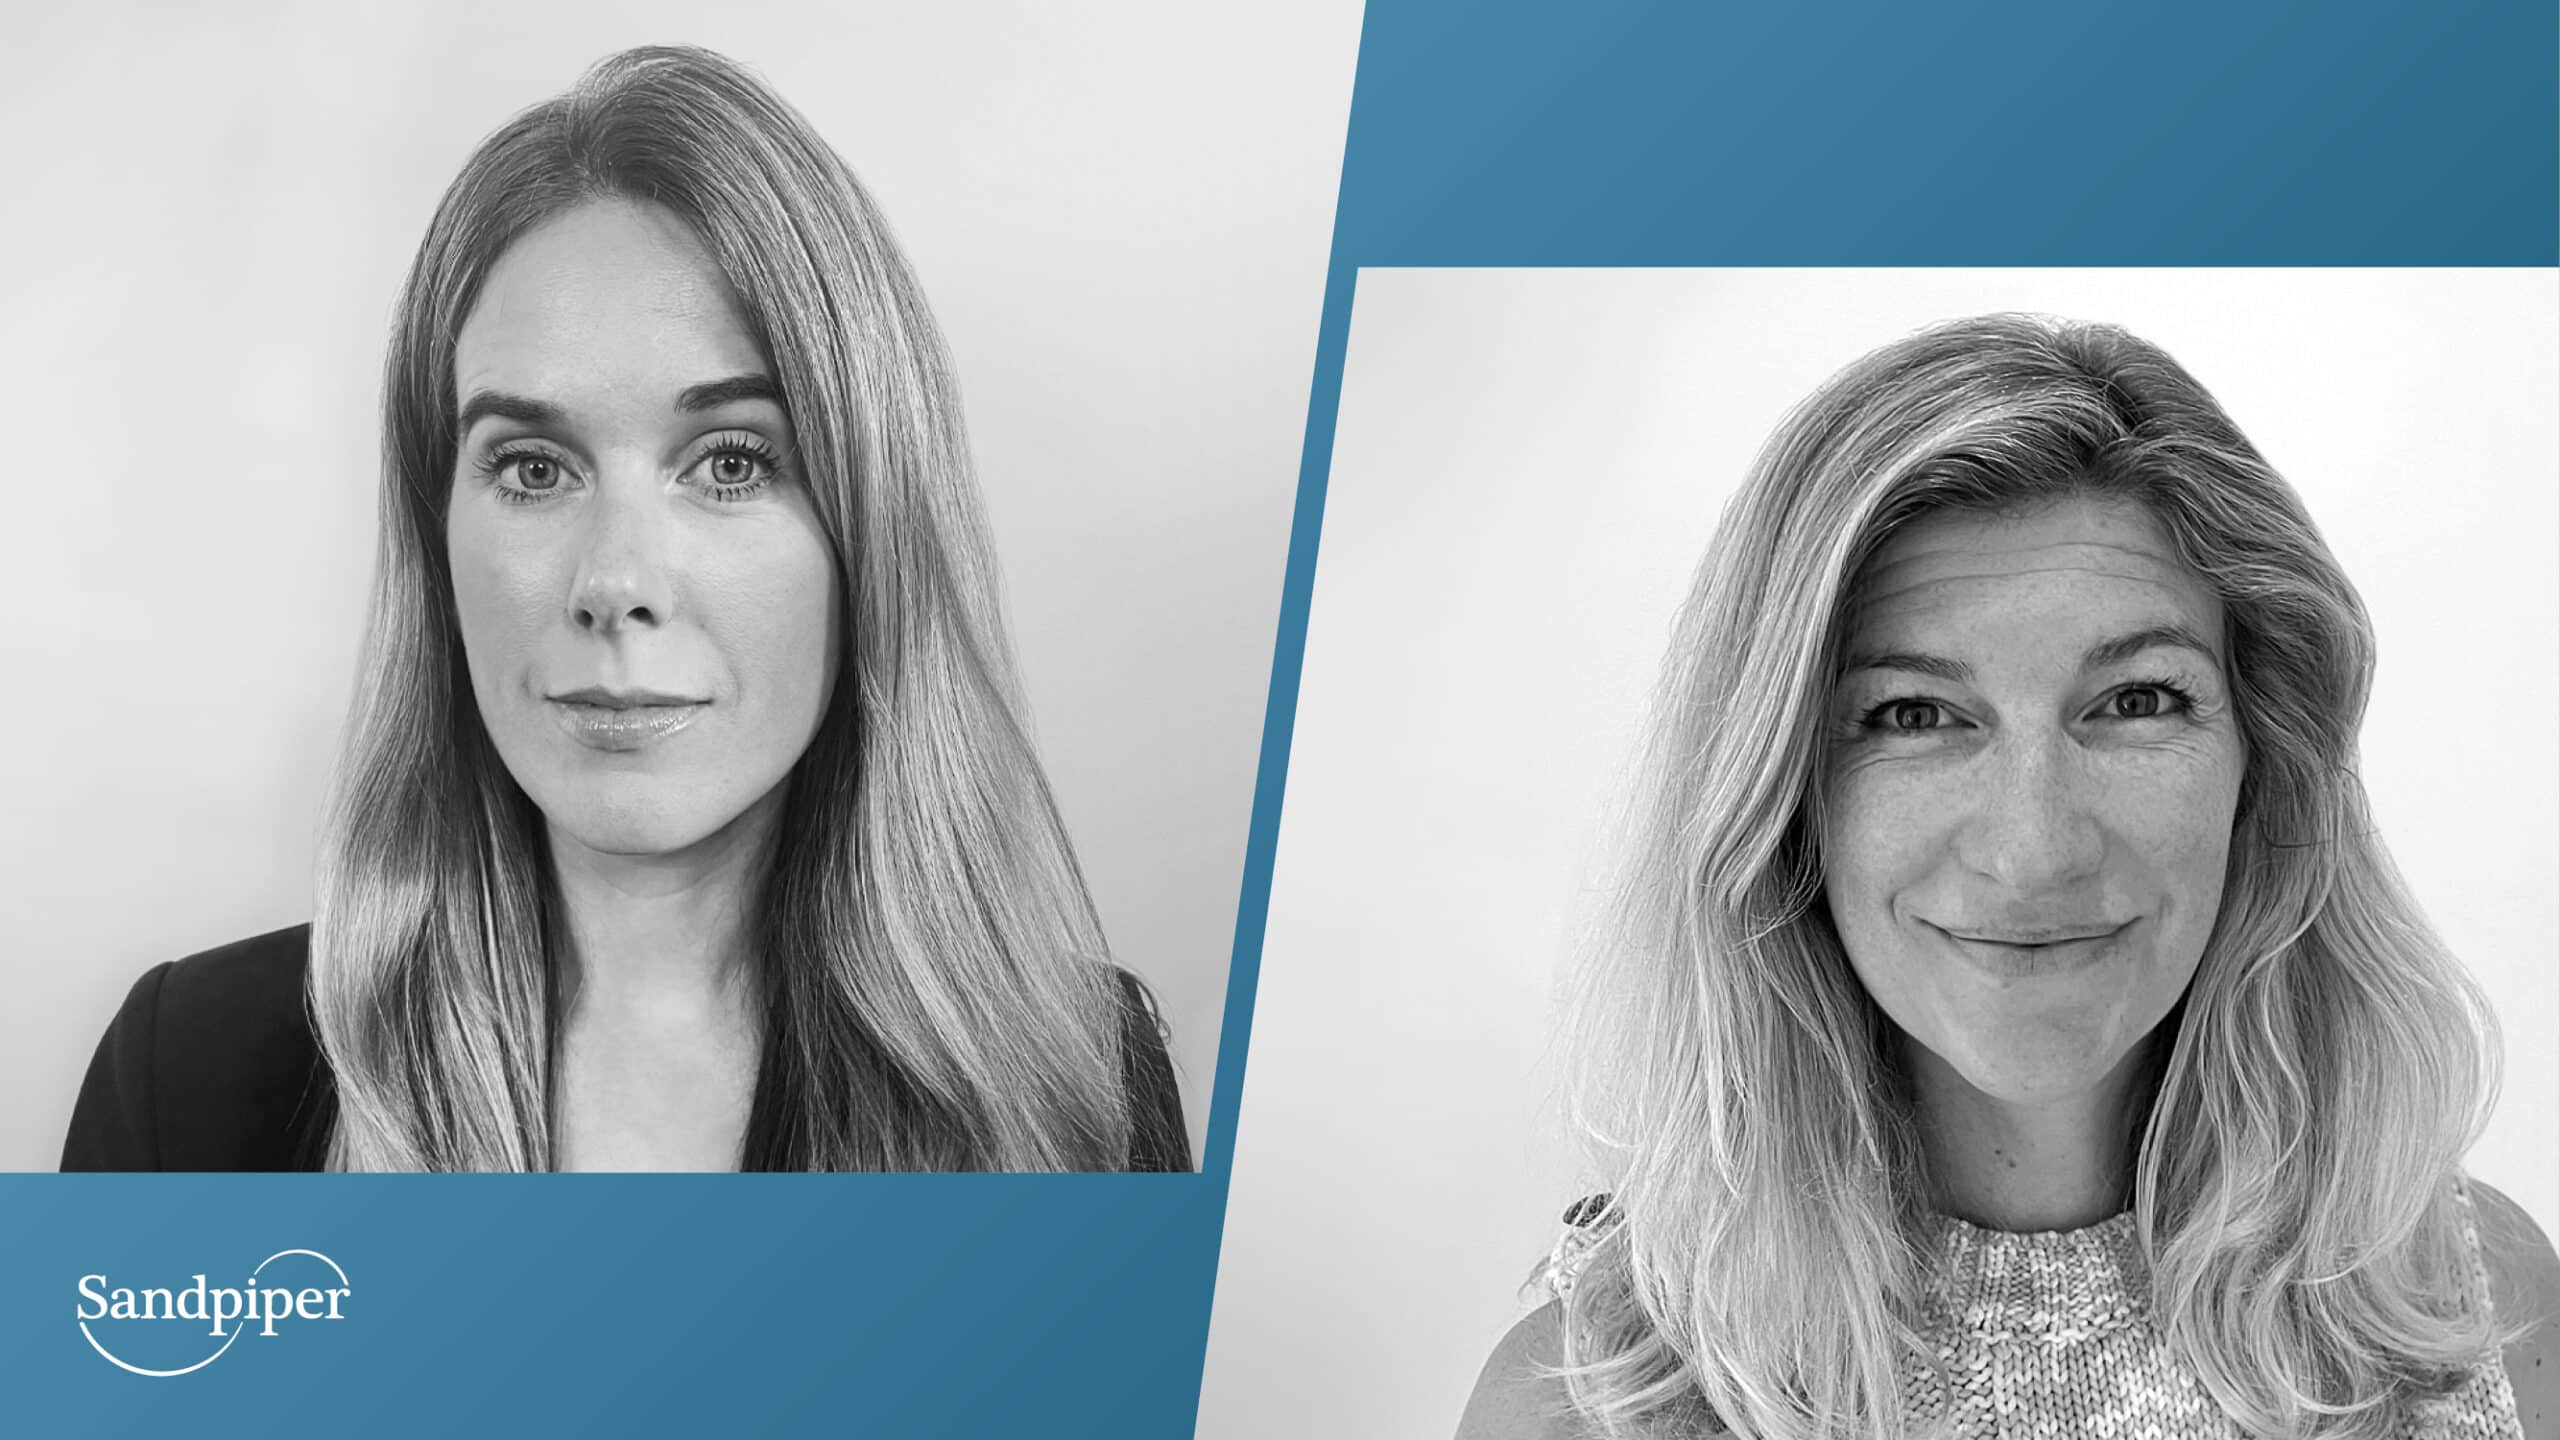 Sandpiper Appoints Camille Middleditch and Charlotte Whale to Growing New Zealand Team